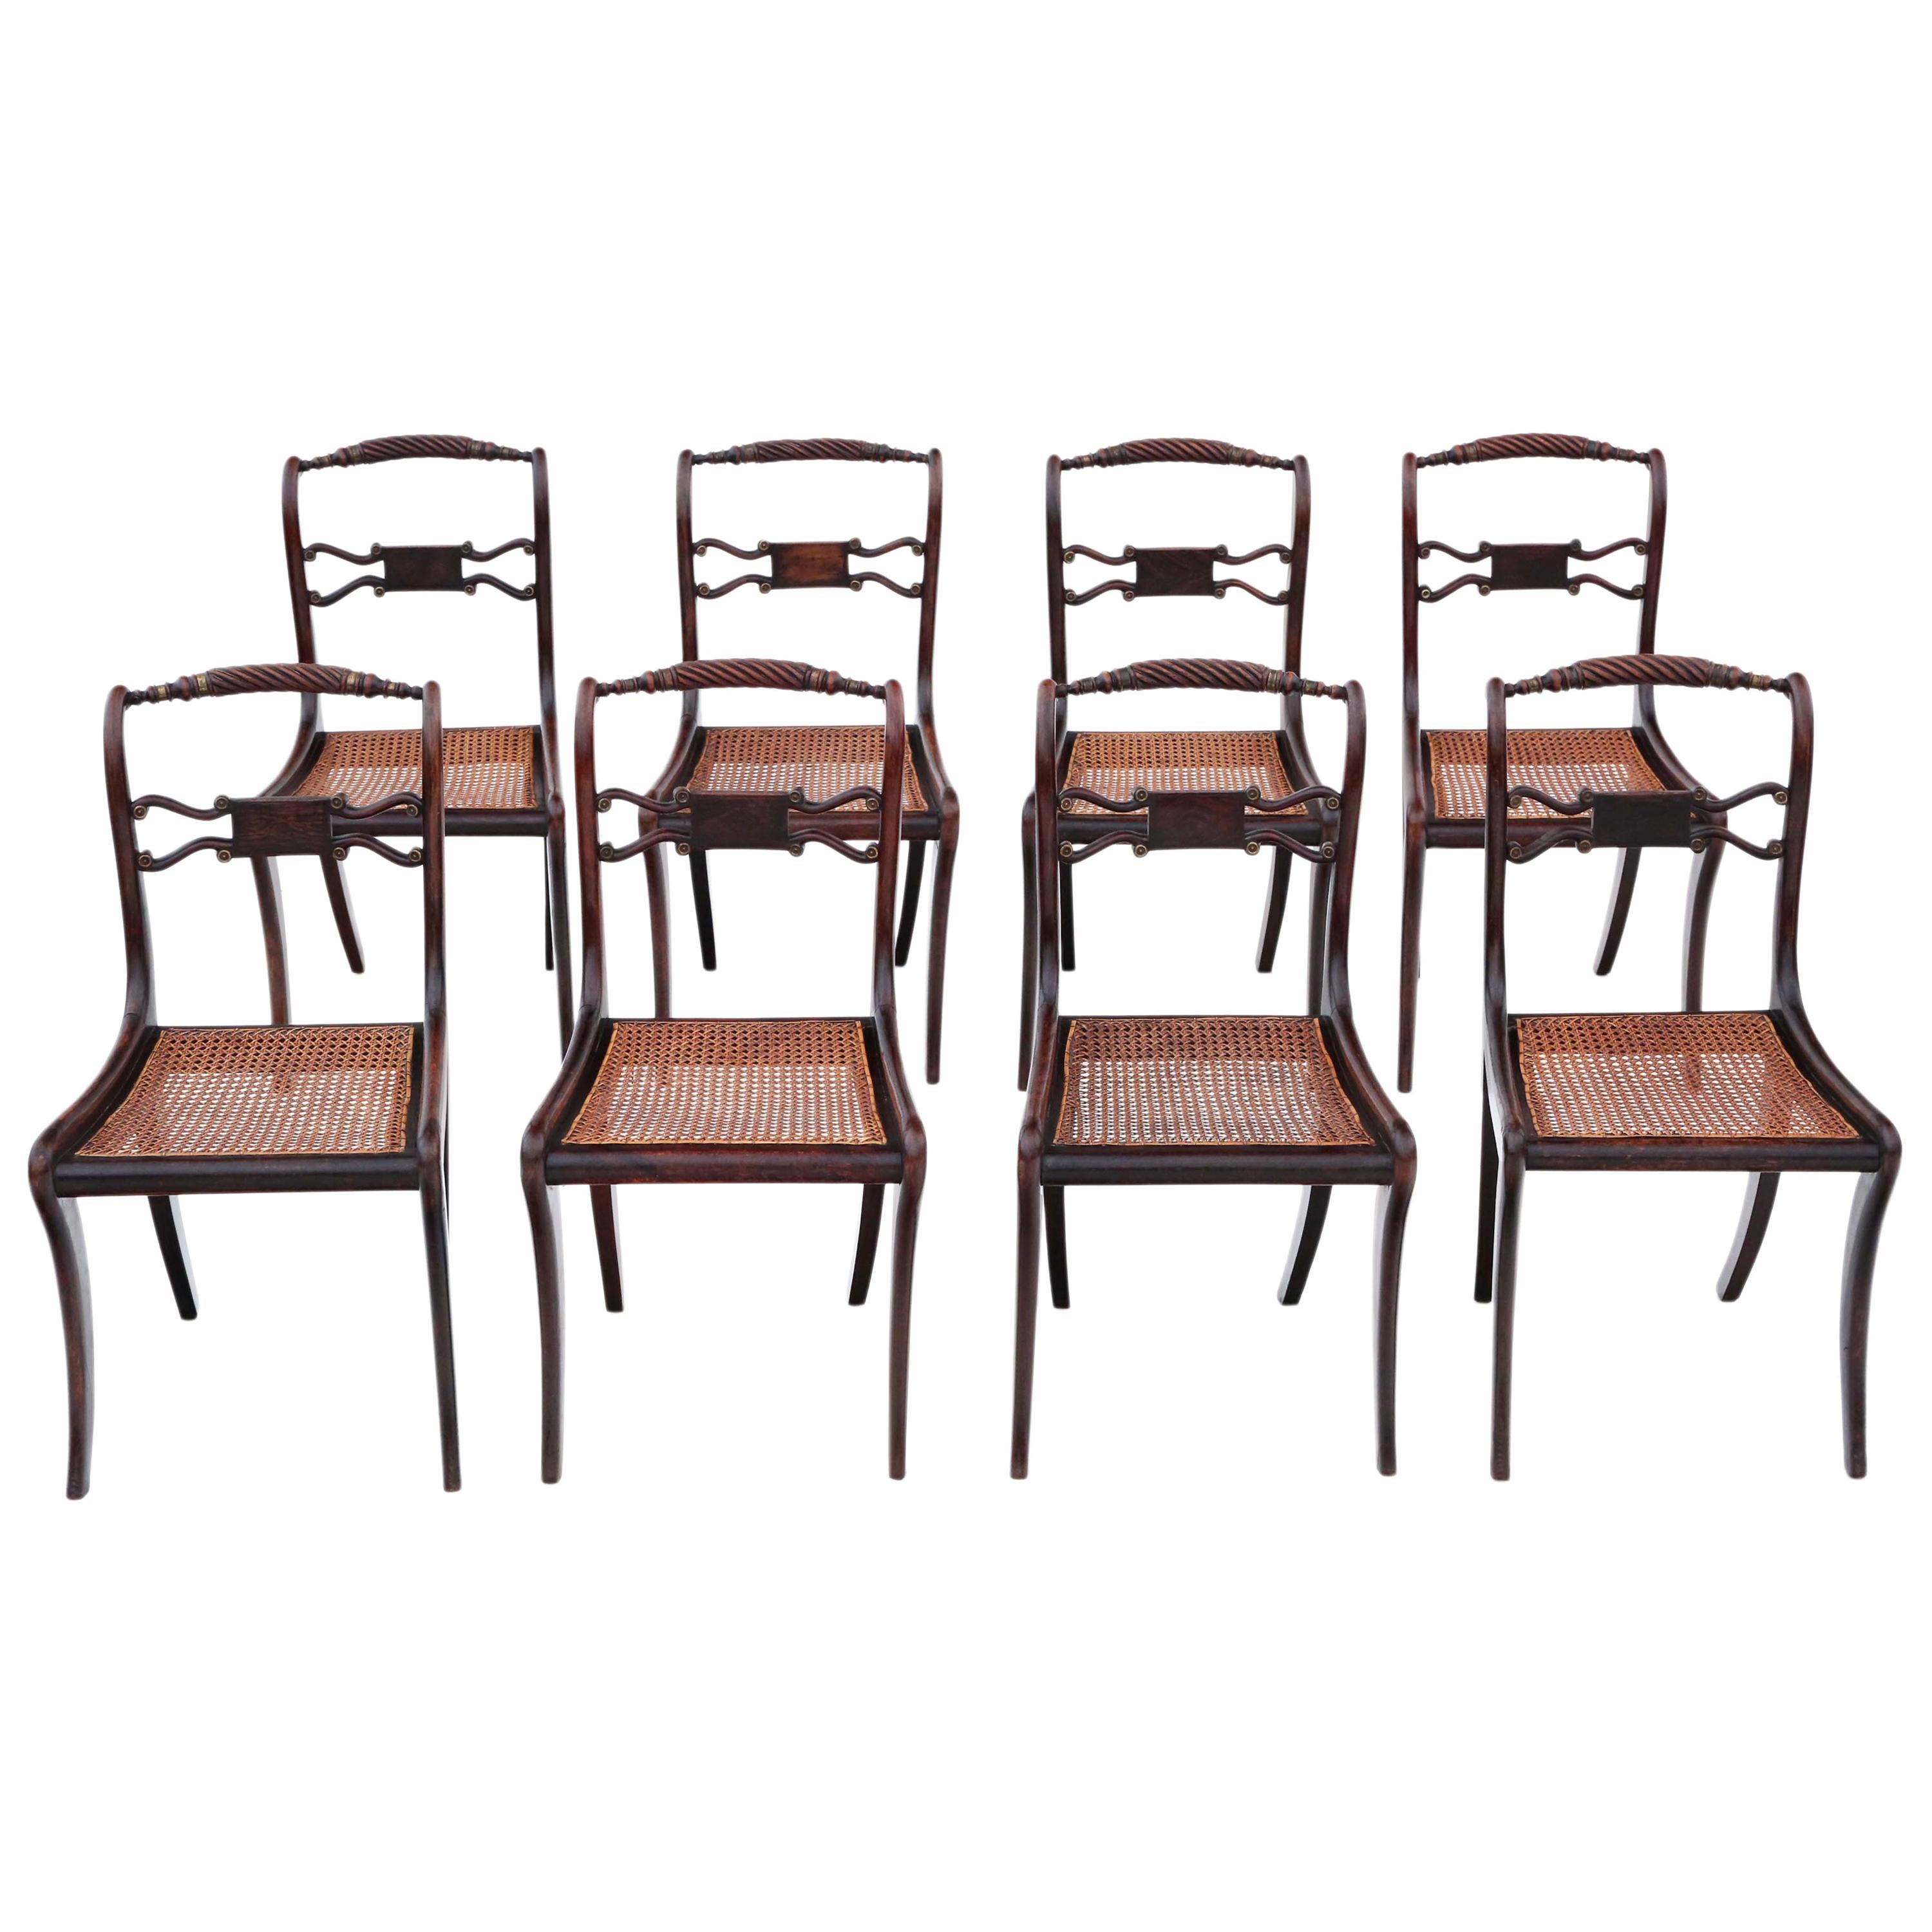 Antique Set of 8 Regency Faux Rosewood Dining Chairs